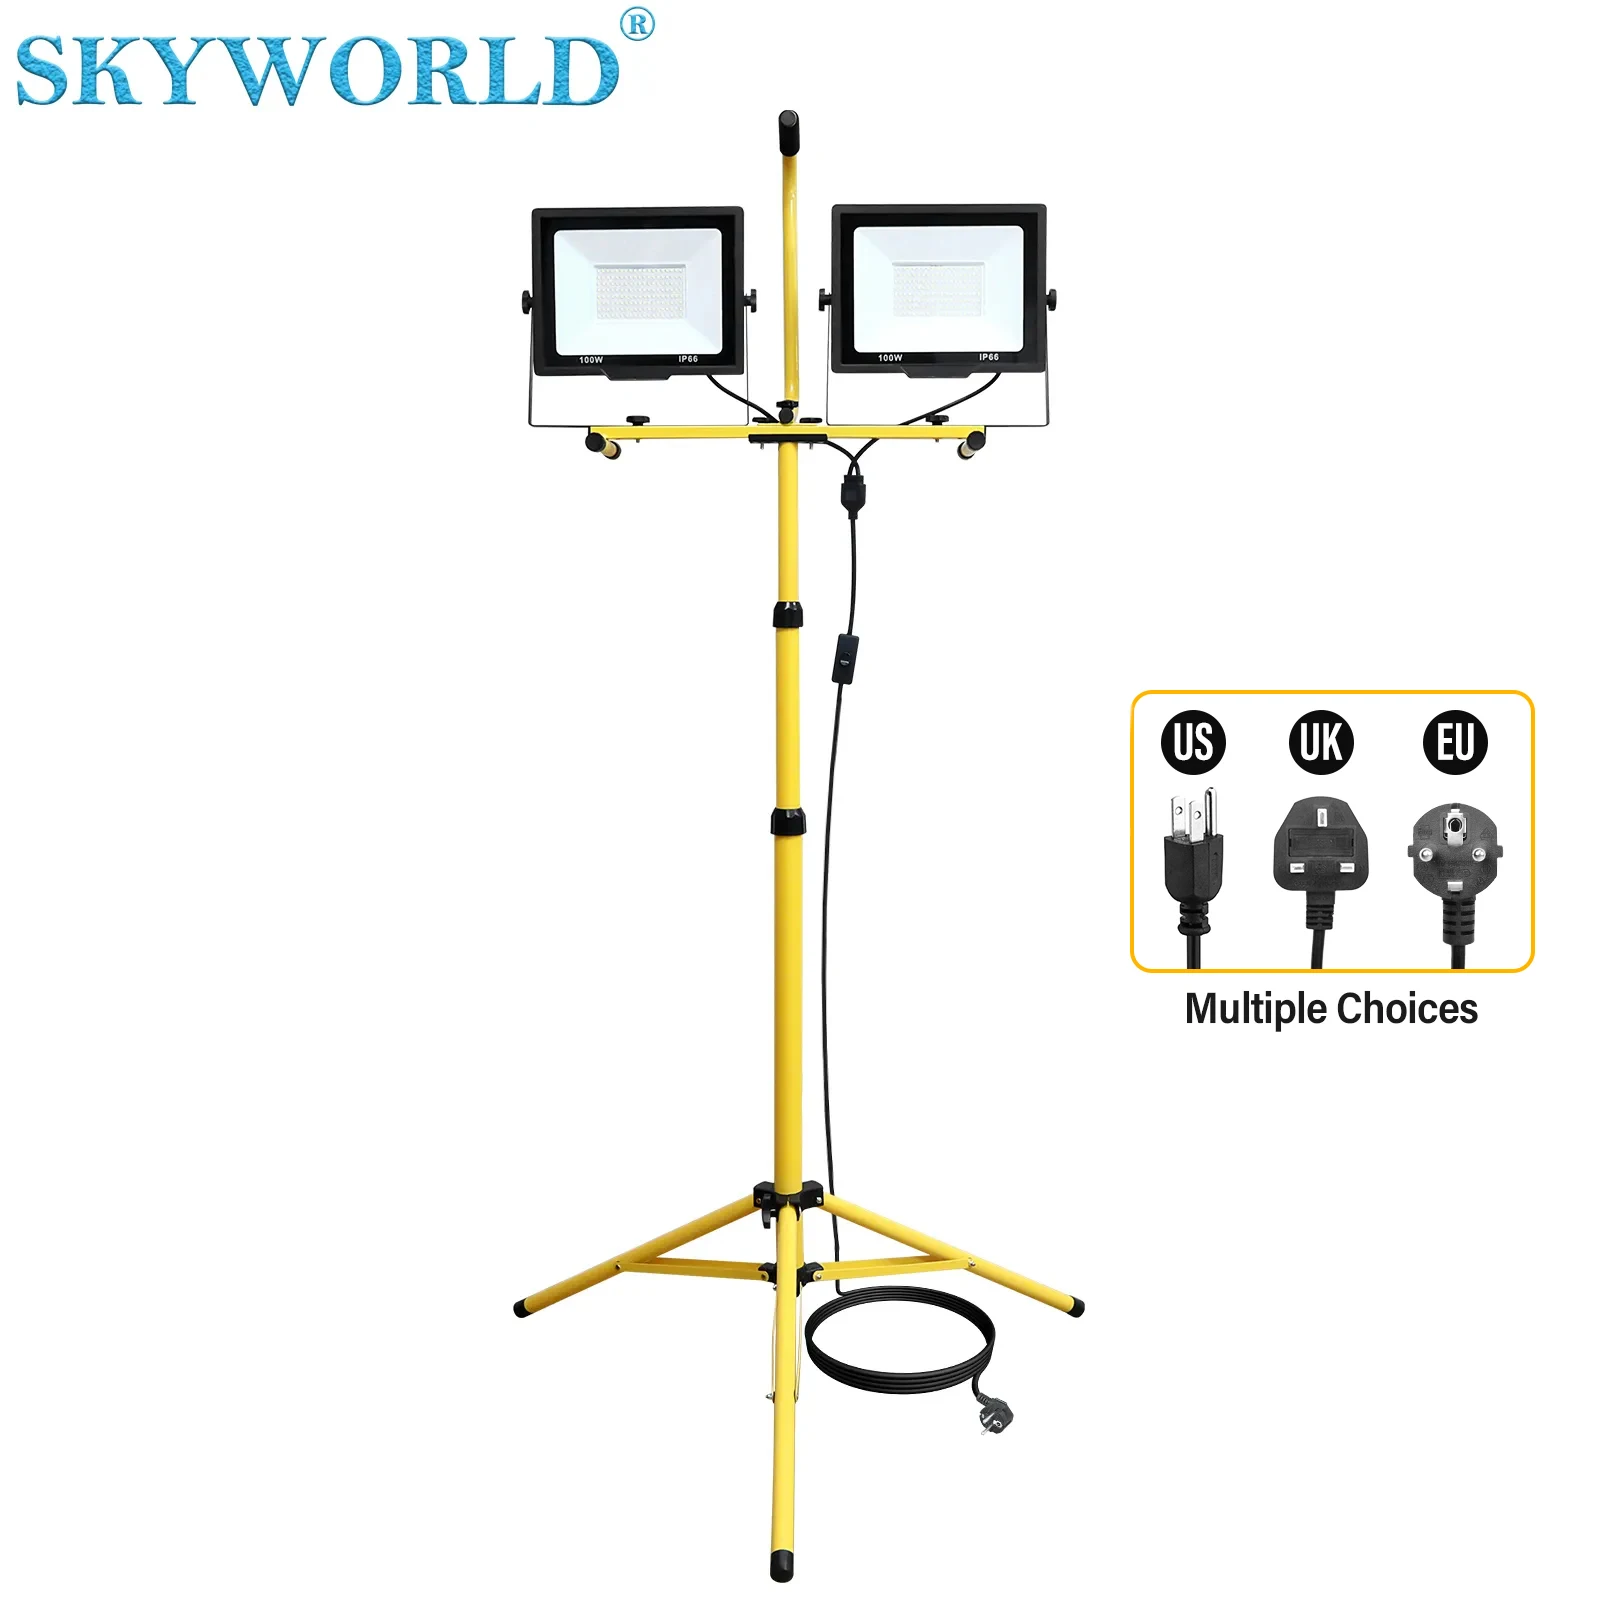 SKYWORLD LED Flood Light 2X100W 5000K led Work Light with 100in Adjustable Metal telescoping Tripod Stand Indoor Outdoor IP66